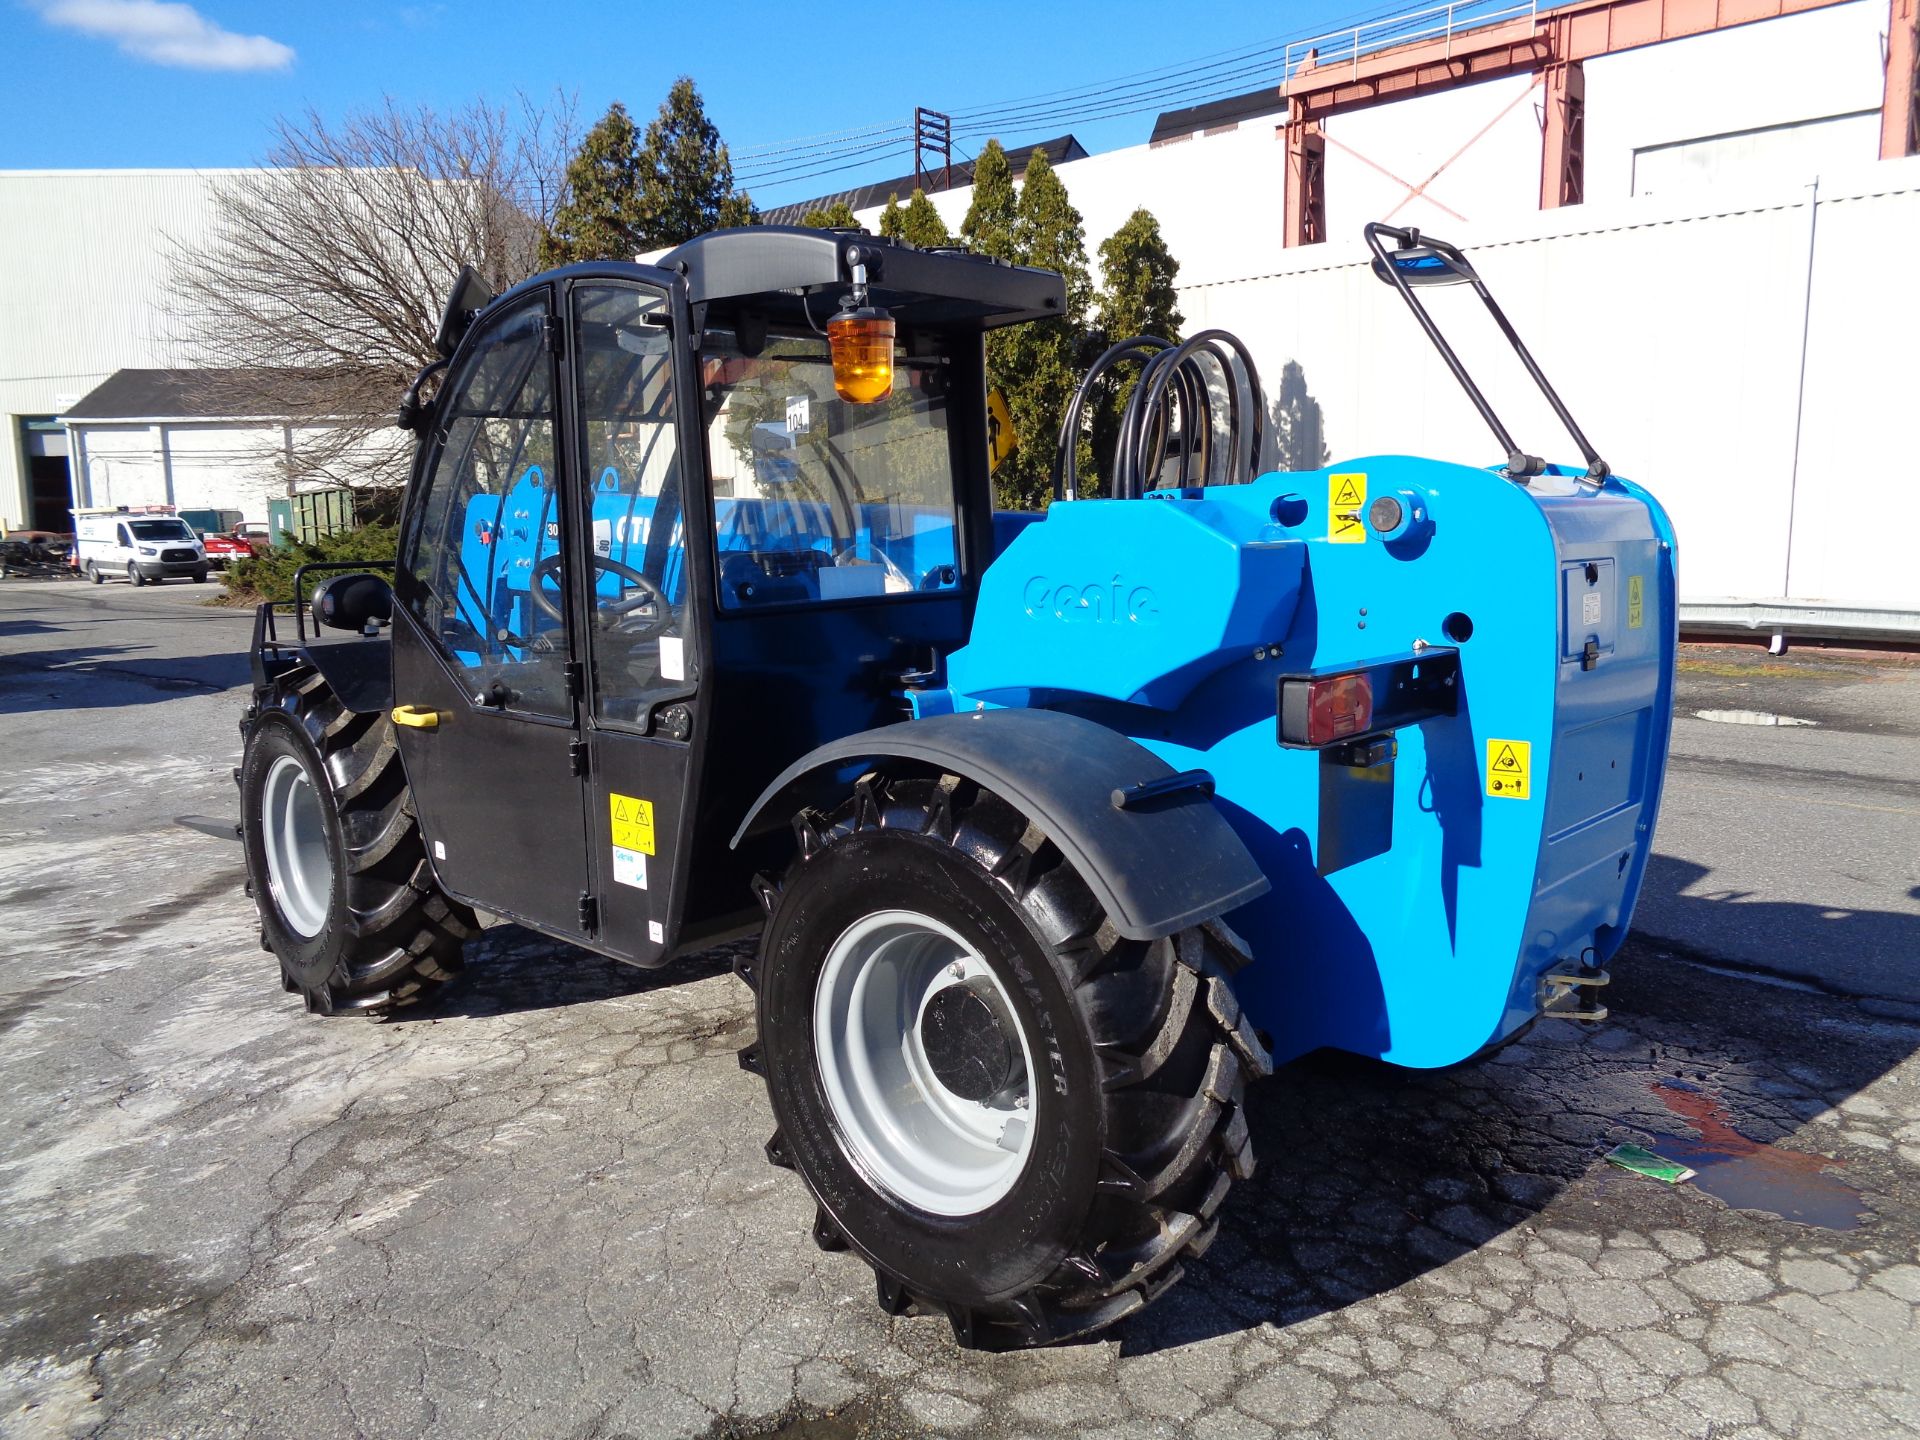 New Unused 2018 Genie GTH3007 Telescopic Forklift 6,600 lbs - Enclosed Cab - Image 19 of 23